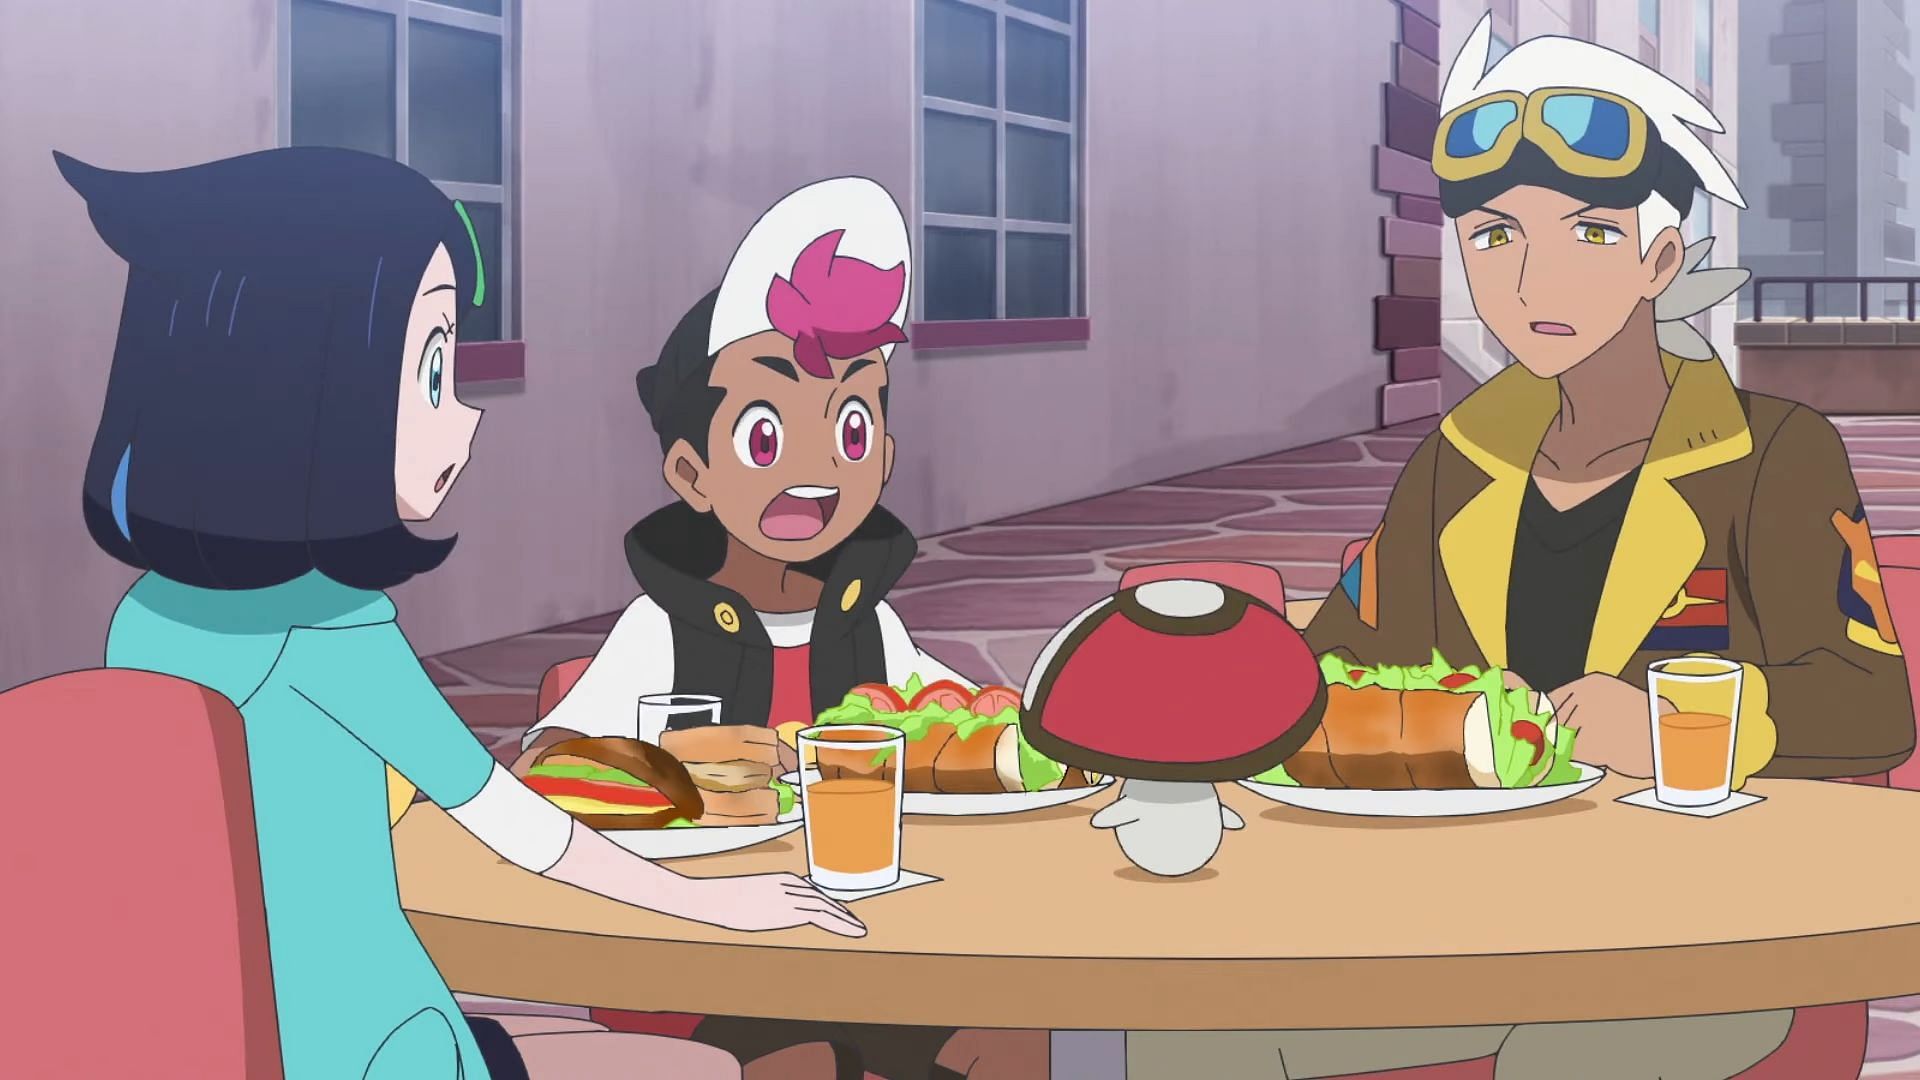 The group is surprised by a Foongus during lunch in Pokemon Horizons Episode 28 (Image via The Pokemon Company)